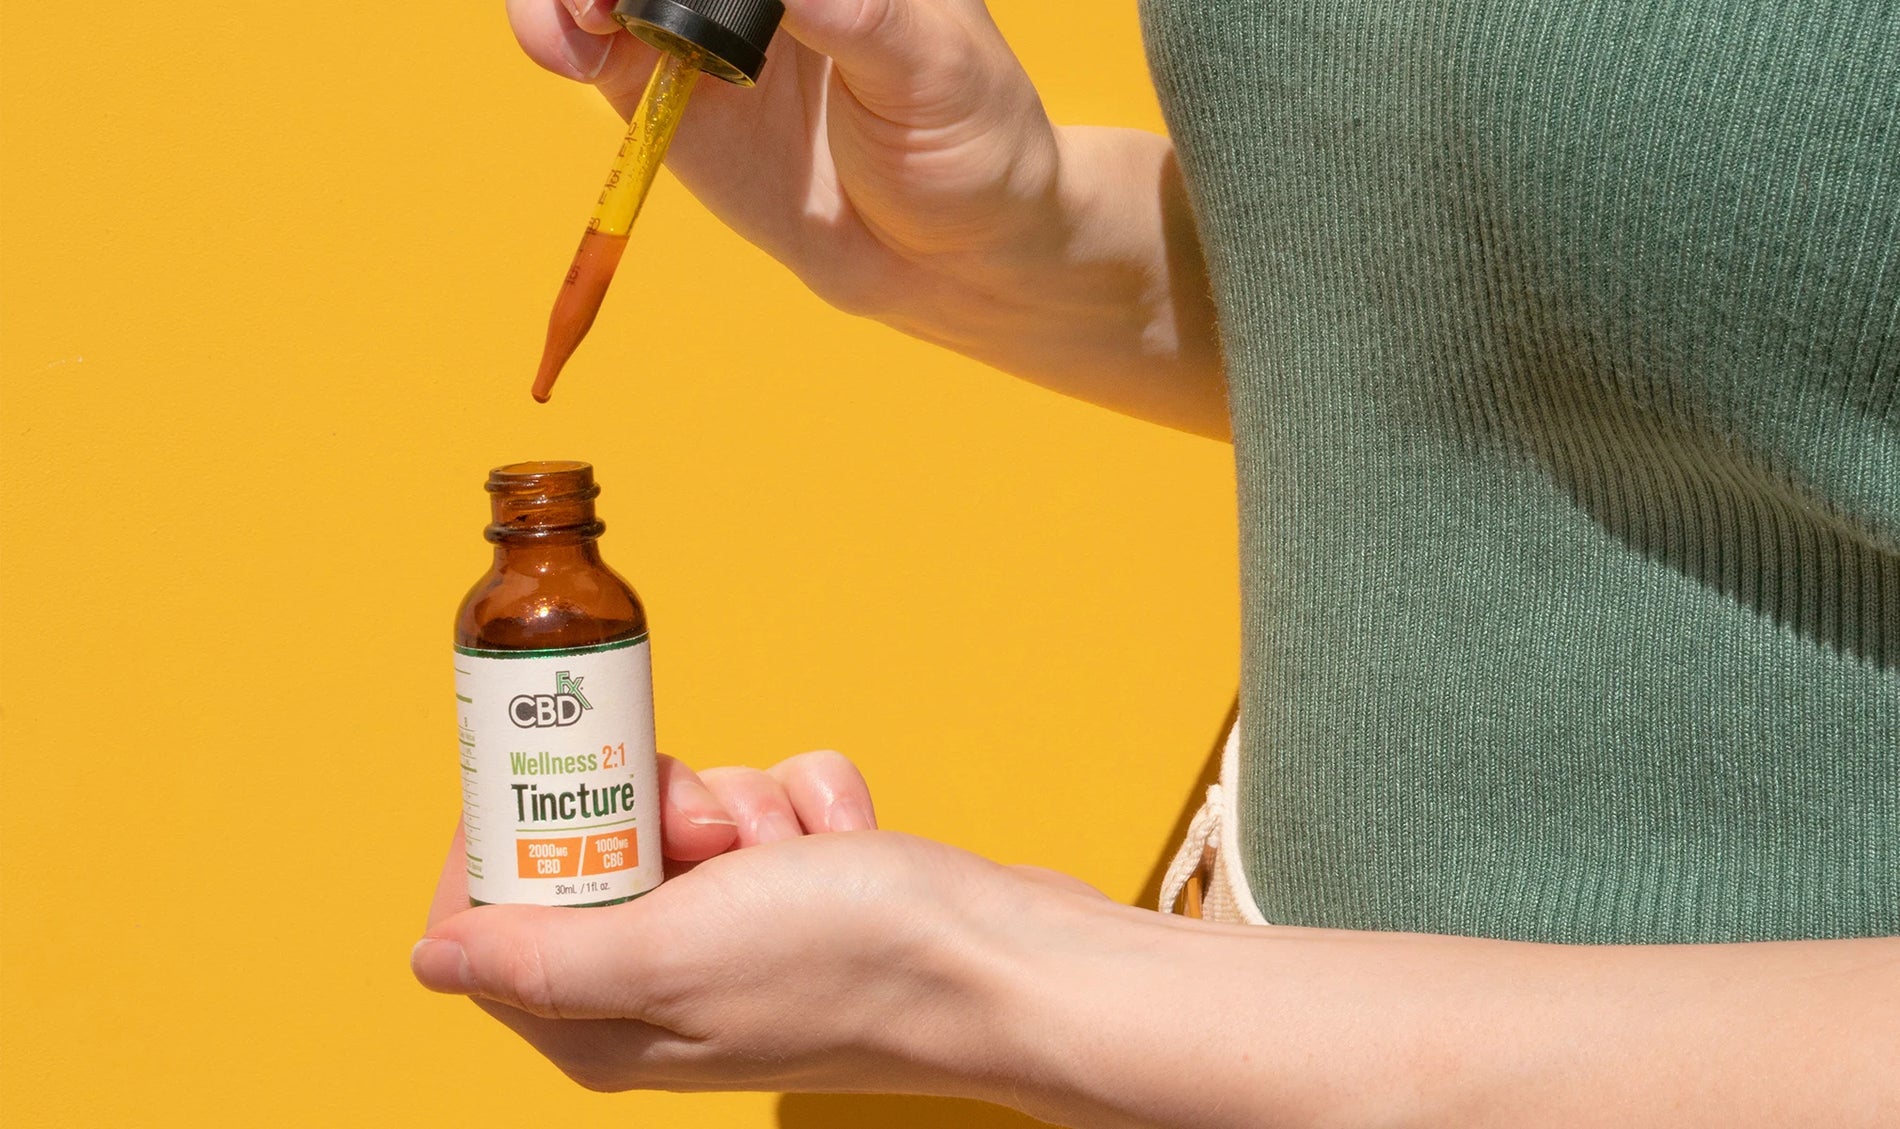 First Time Taking CBD? Here’s What To Expect